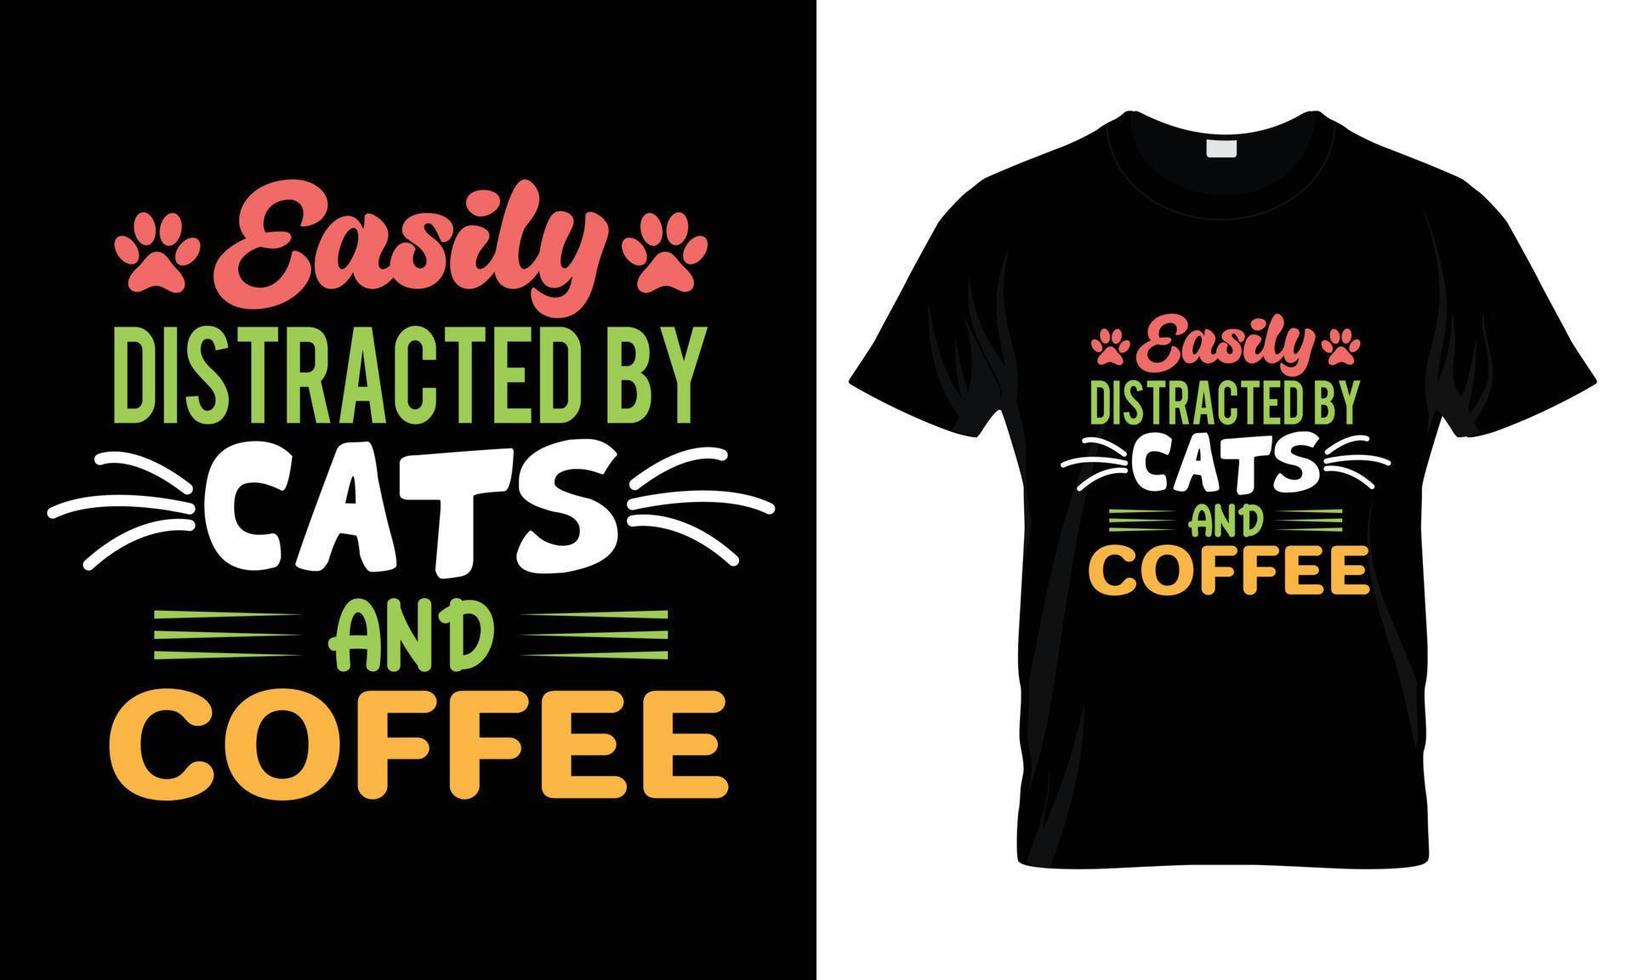 Easily distracted by cats and coffee t shirt design vector